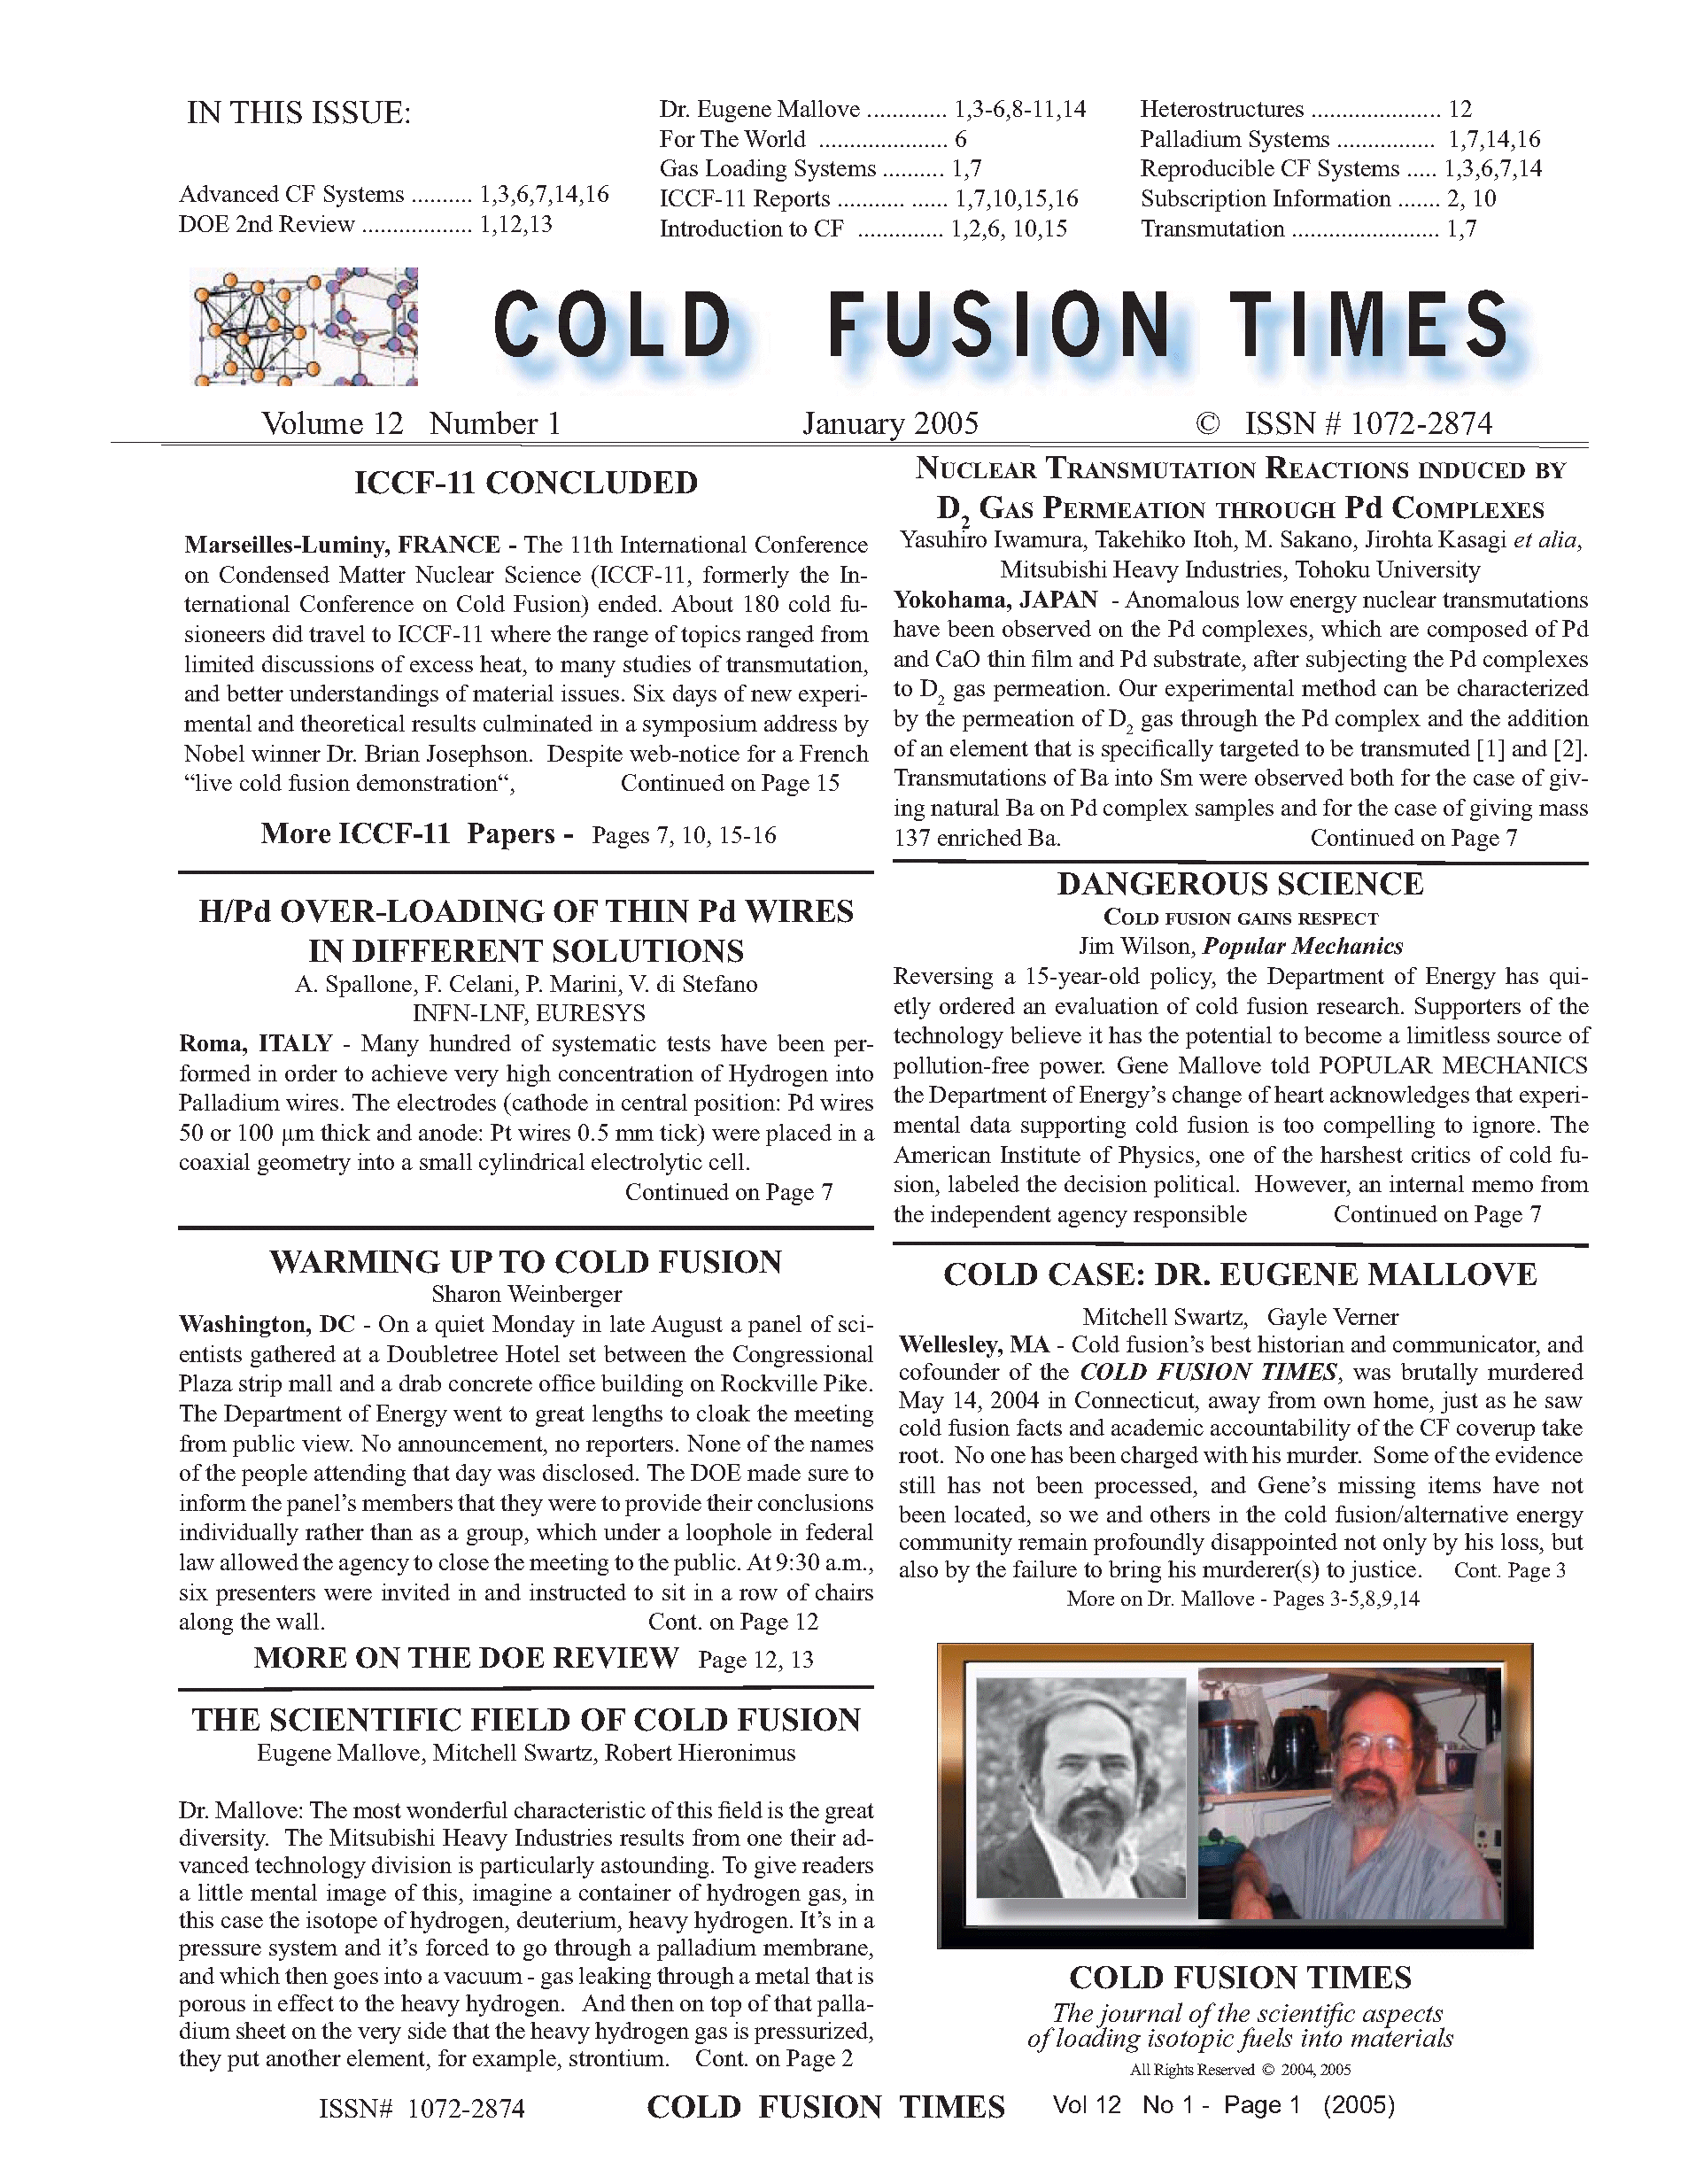 Front page of the COLD FUSION TIMES, volume 12, issue 1 (Fall 2004-January 2005)